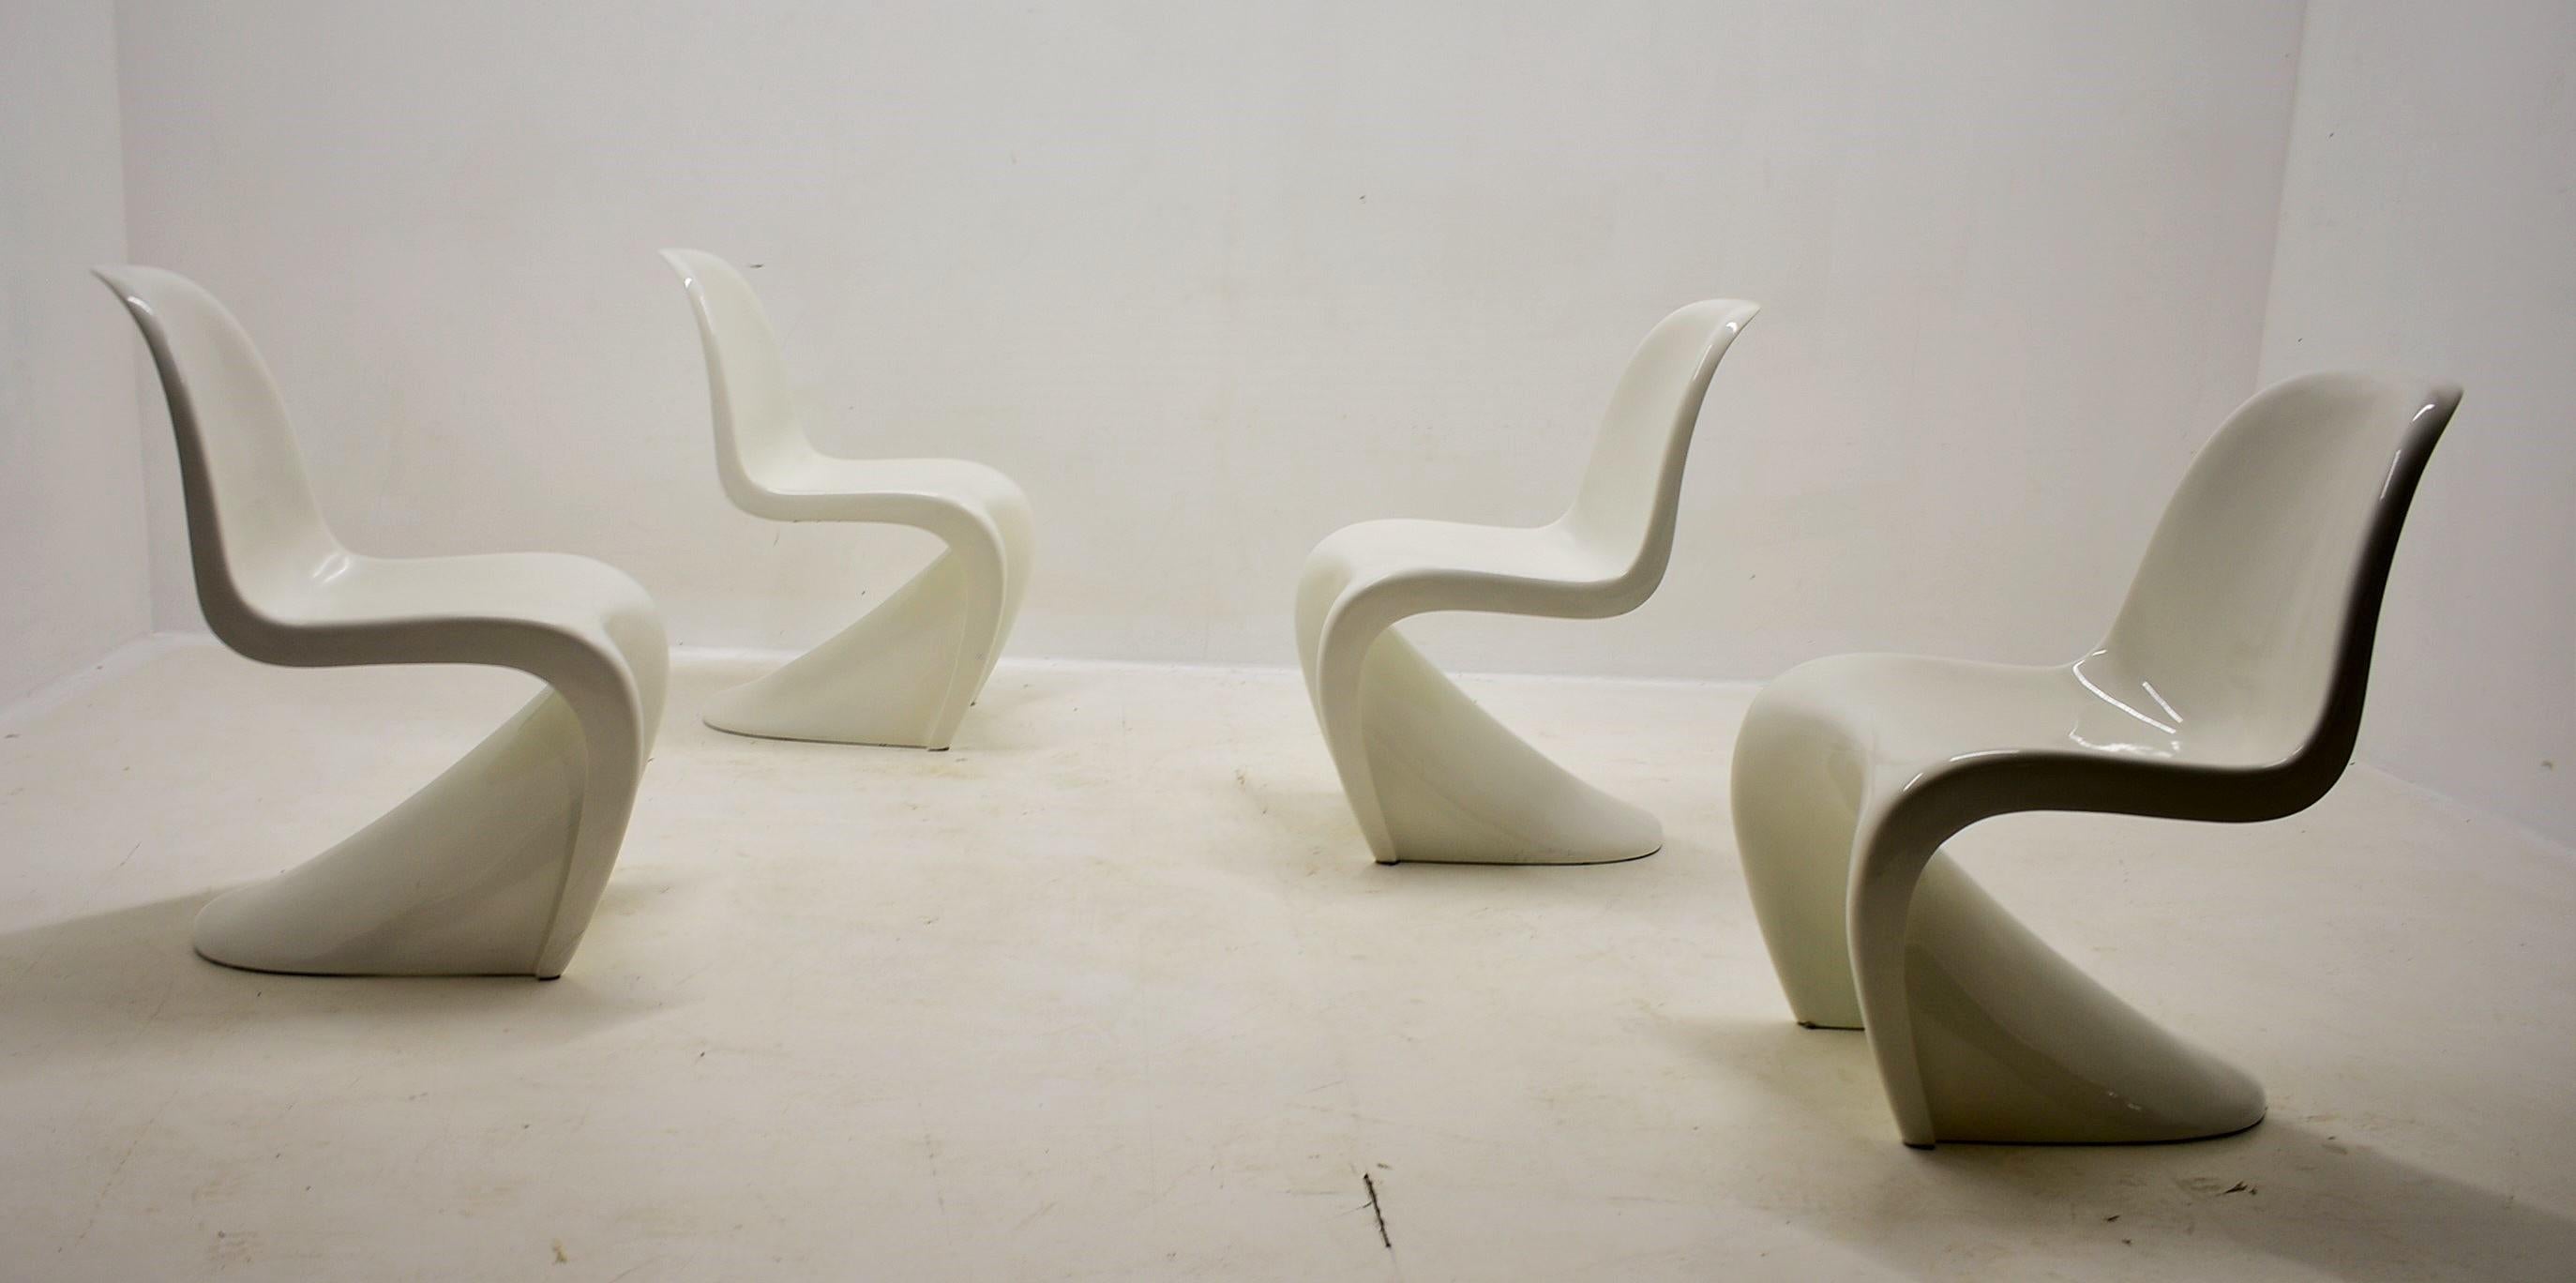 Mid-20th Century Panton S, Chairs Vitra by Verner Panton for Herman Miller 1965s For Sale